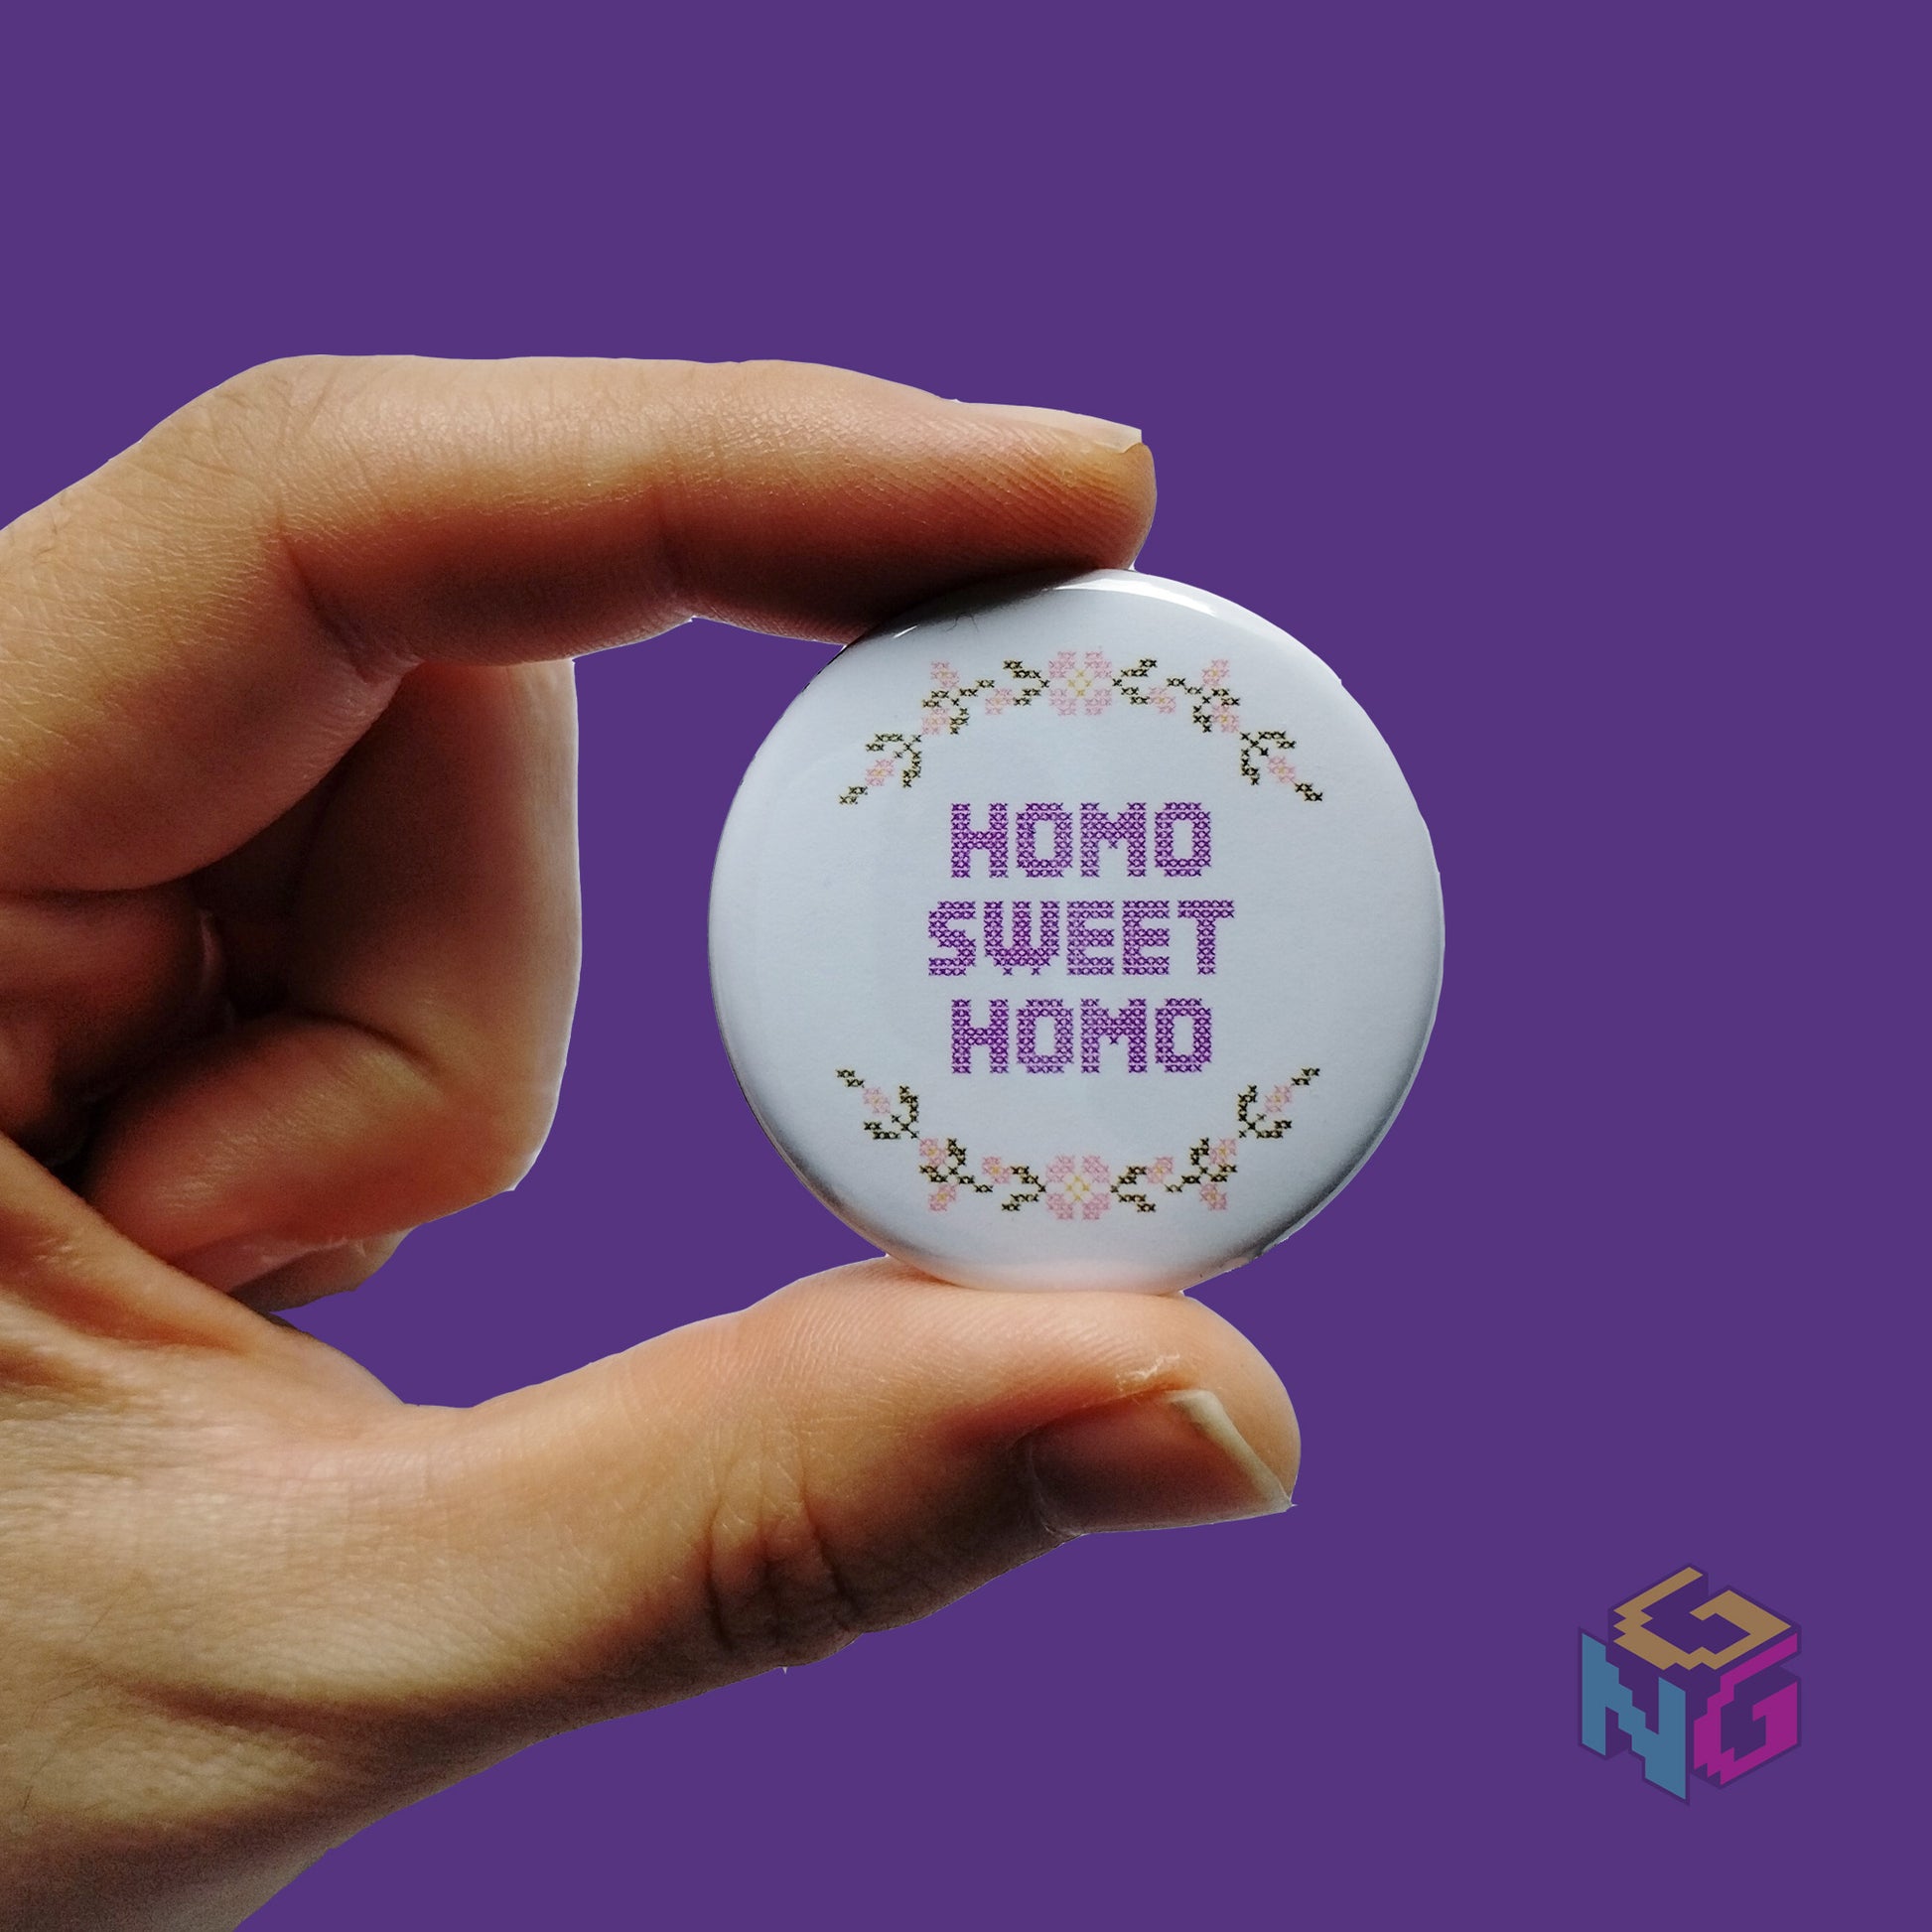 round homo sweet homo button held in hand in front of purple background